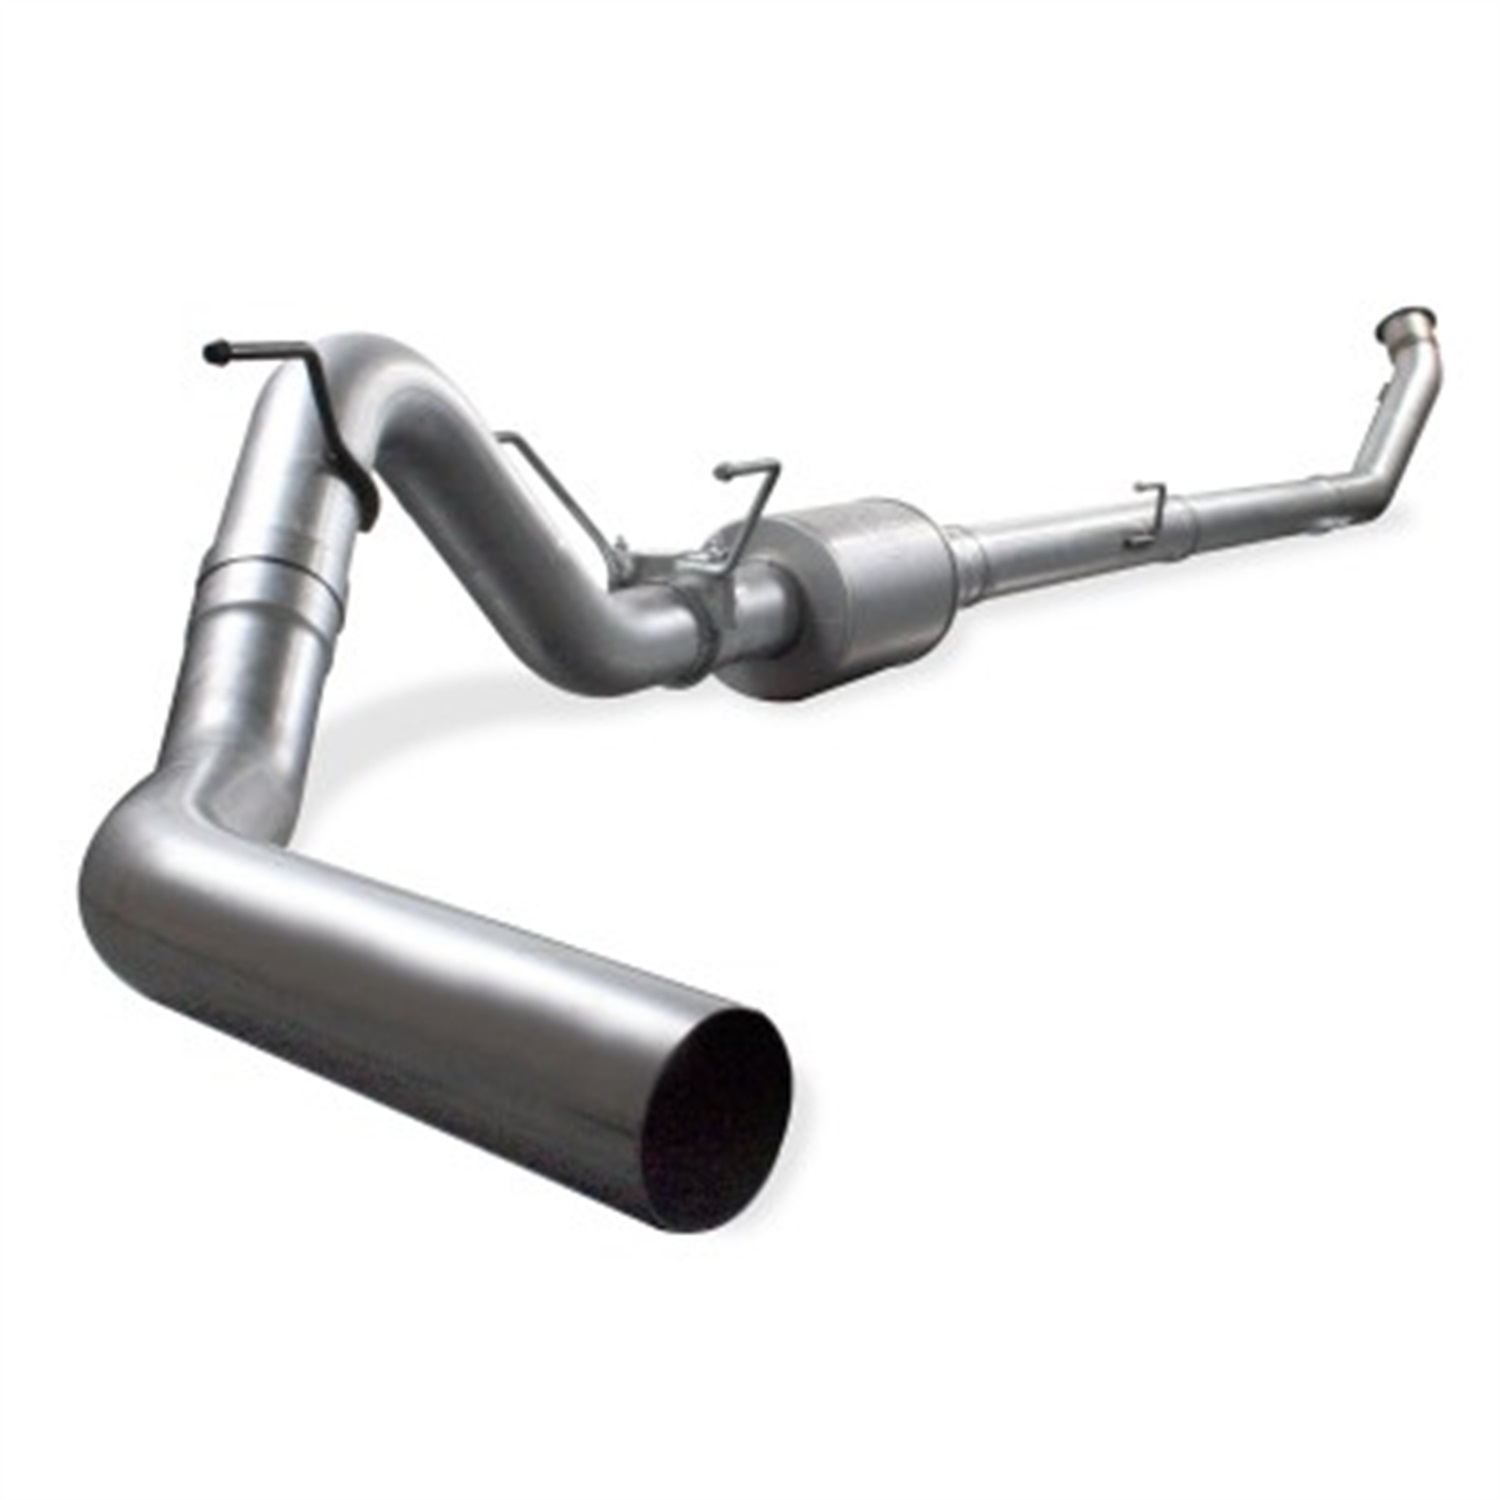 aFe Power aFe Power 49-02003 ATLAS Turbo-Back Exhaust System Fits 05-07 Ram 2500 Ram 3500